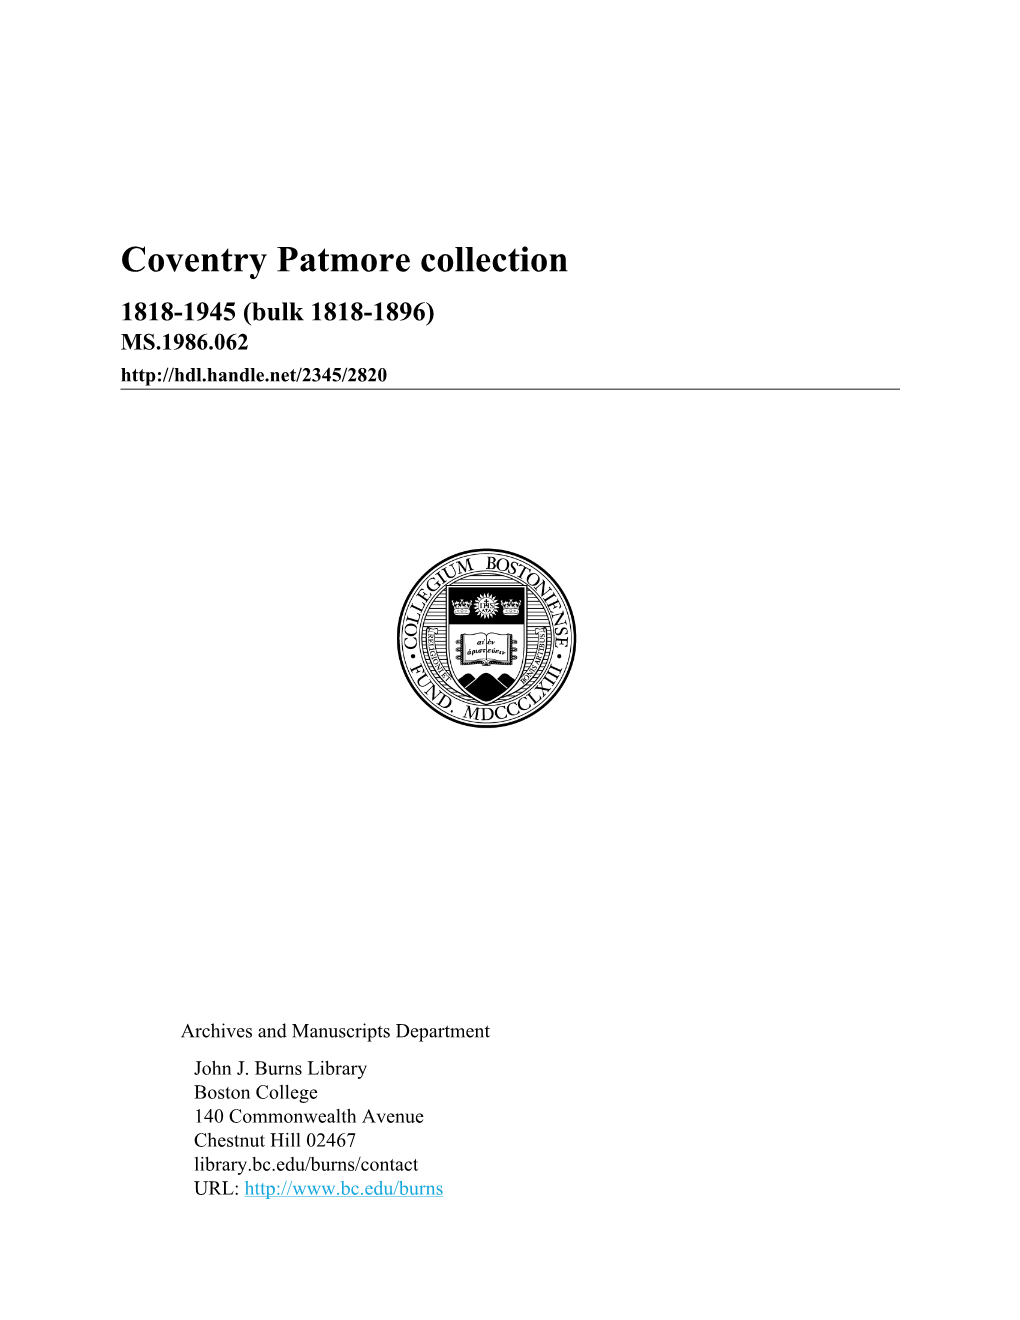 Coventry Patmore Collection 1818-1945 (Bulk 1818-1896) MS.1986.062